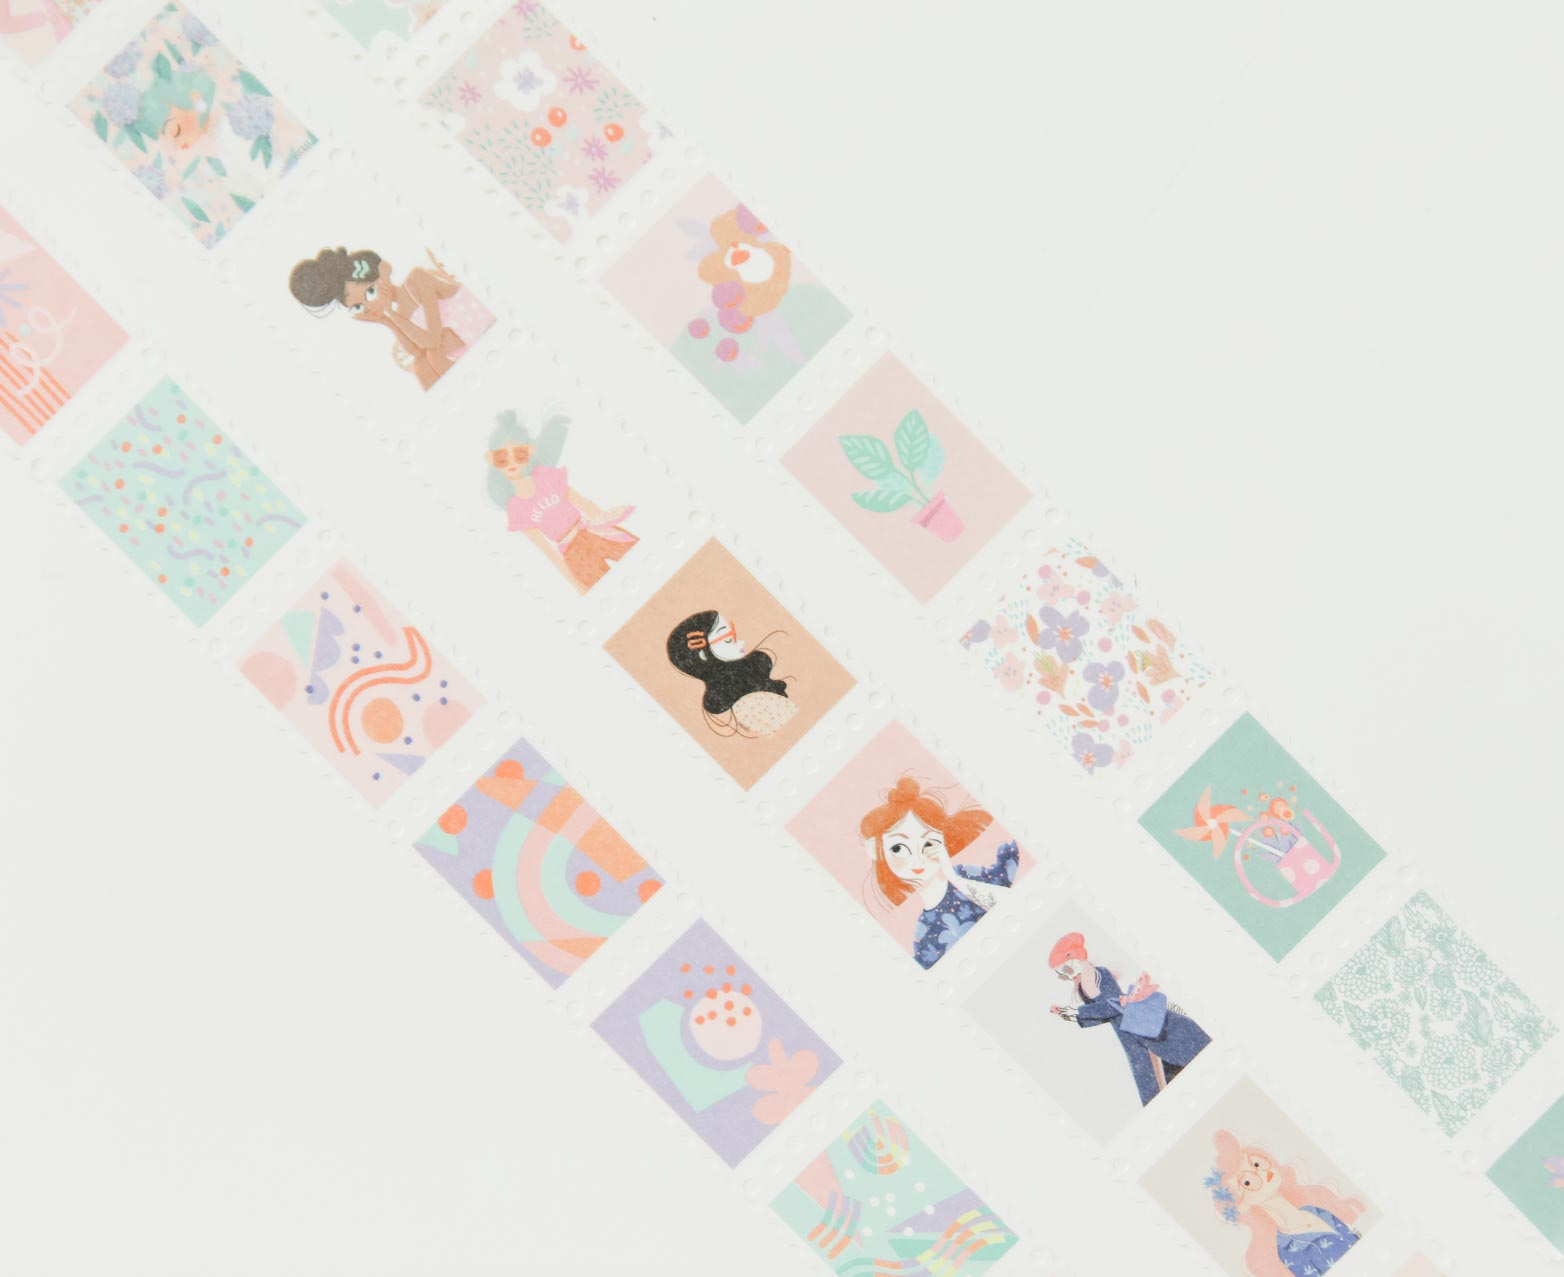 Our Awwwdorable Stamp Washi Tape: Colourful Ladies Edition!